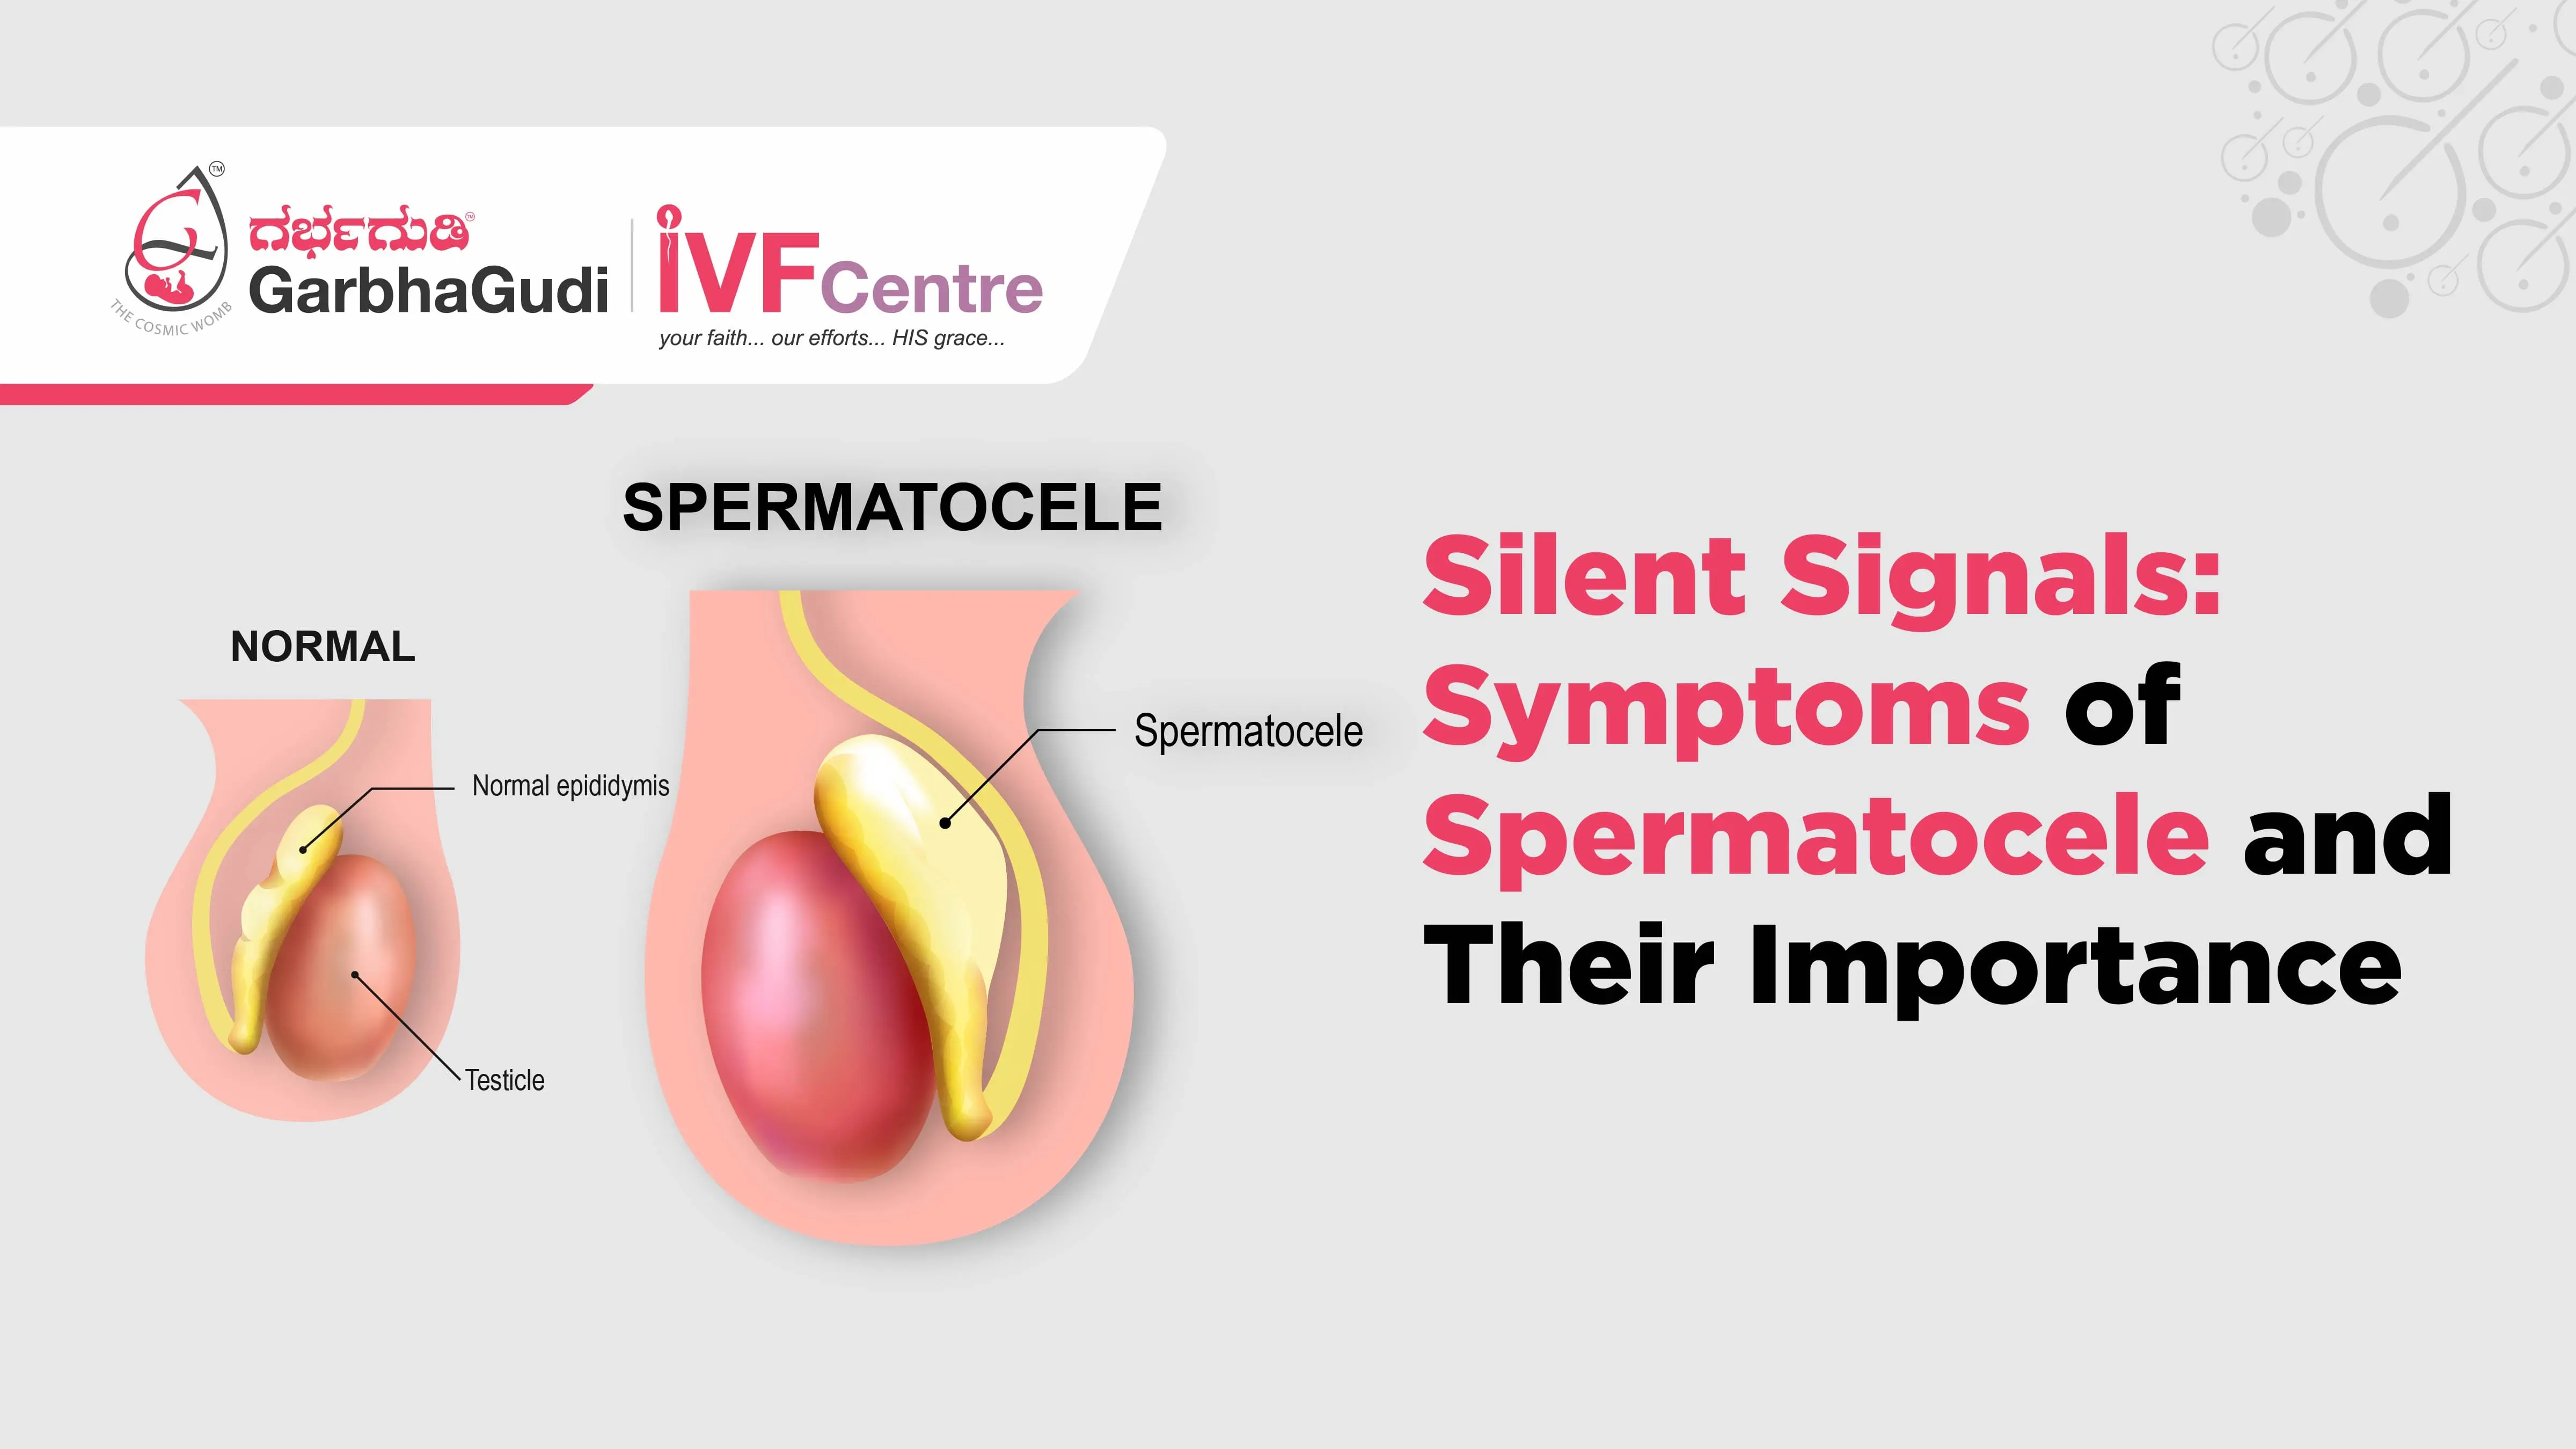 Silent Signals: Symptoms of Spermatocele and Their Importance